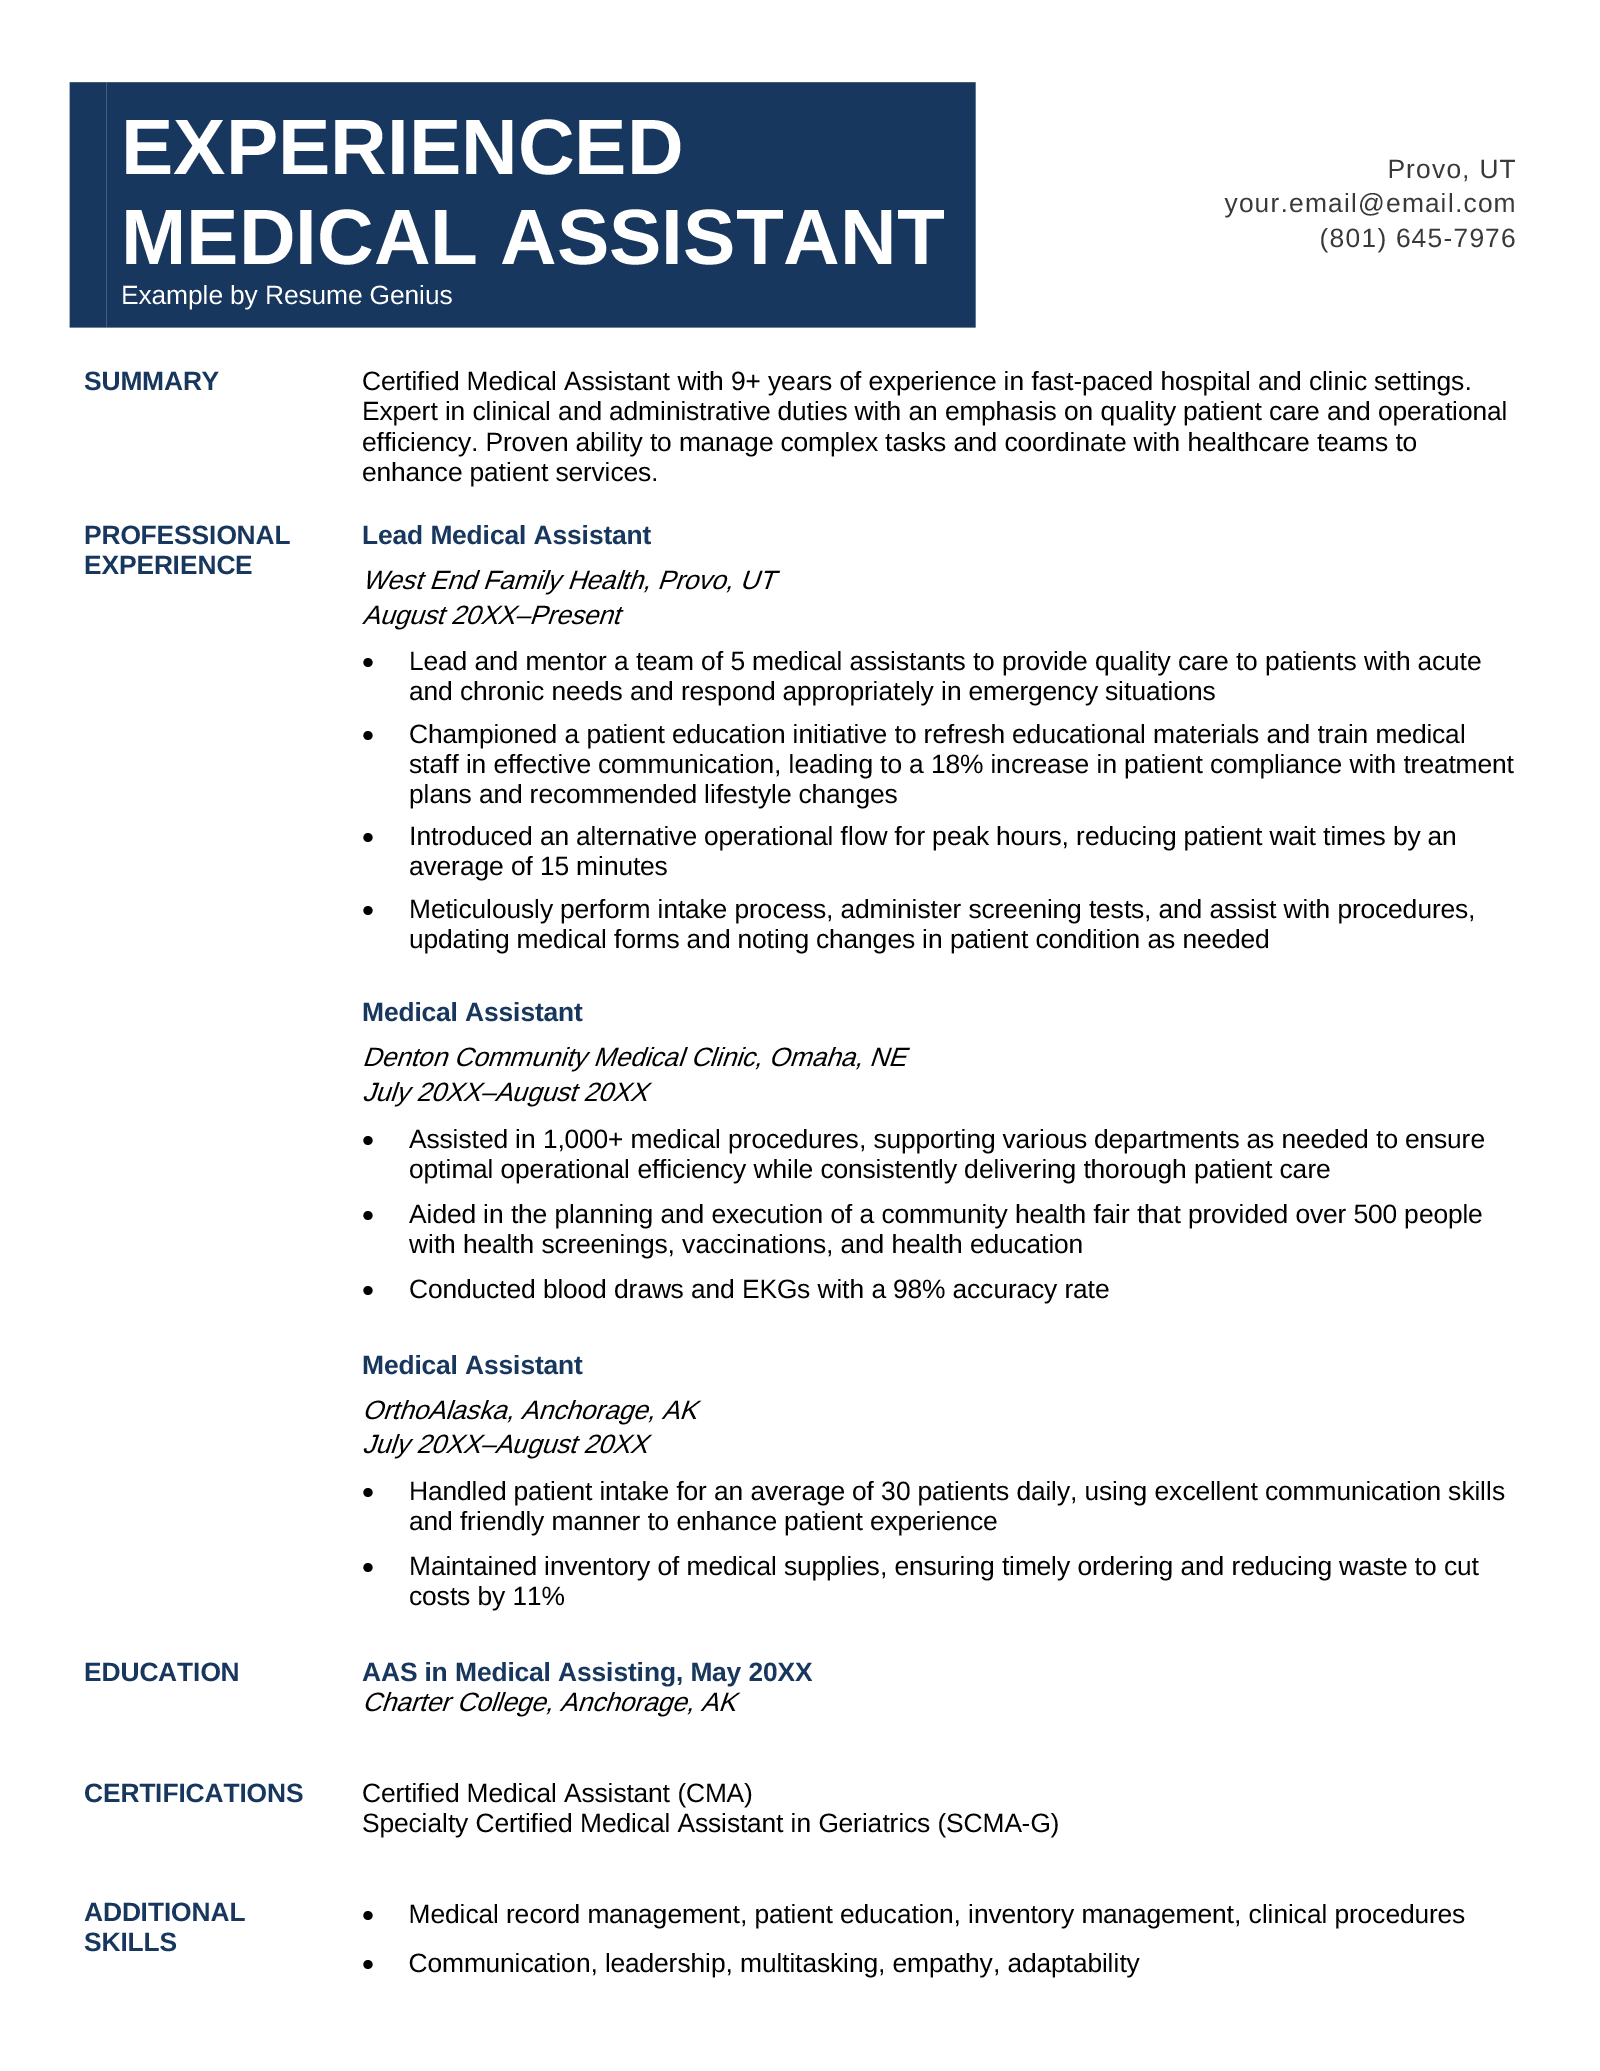 An example of an experienced medical assistant resume on a simple template with a blue color block header.